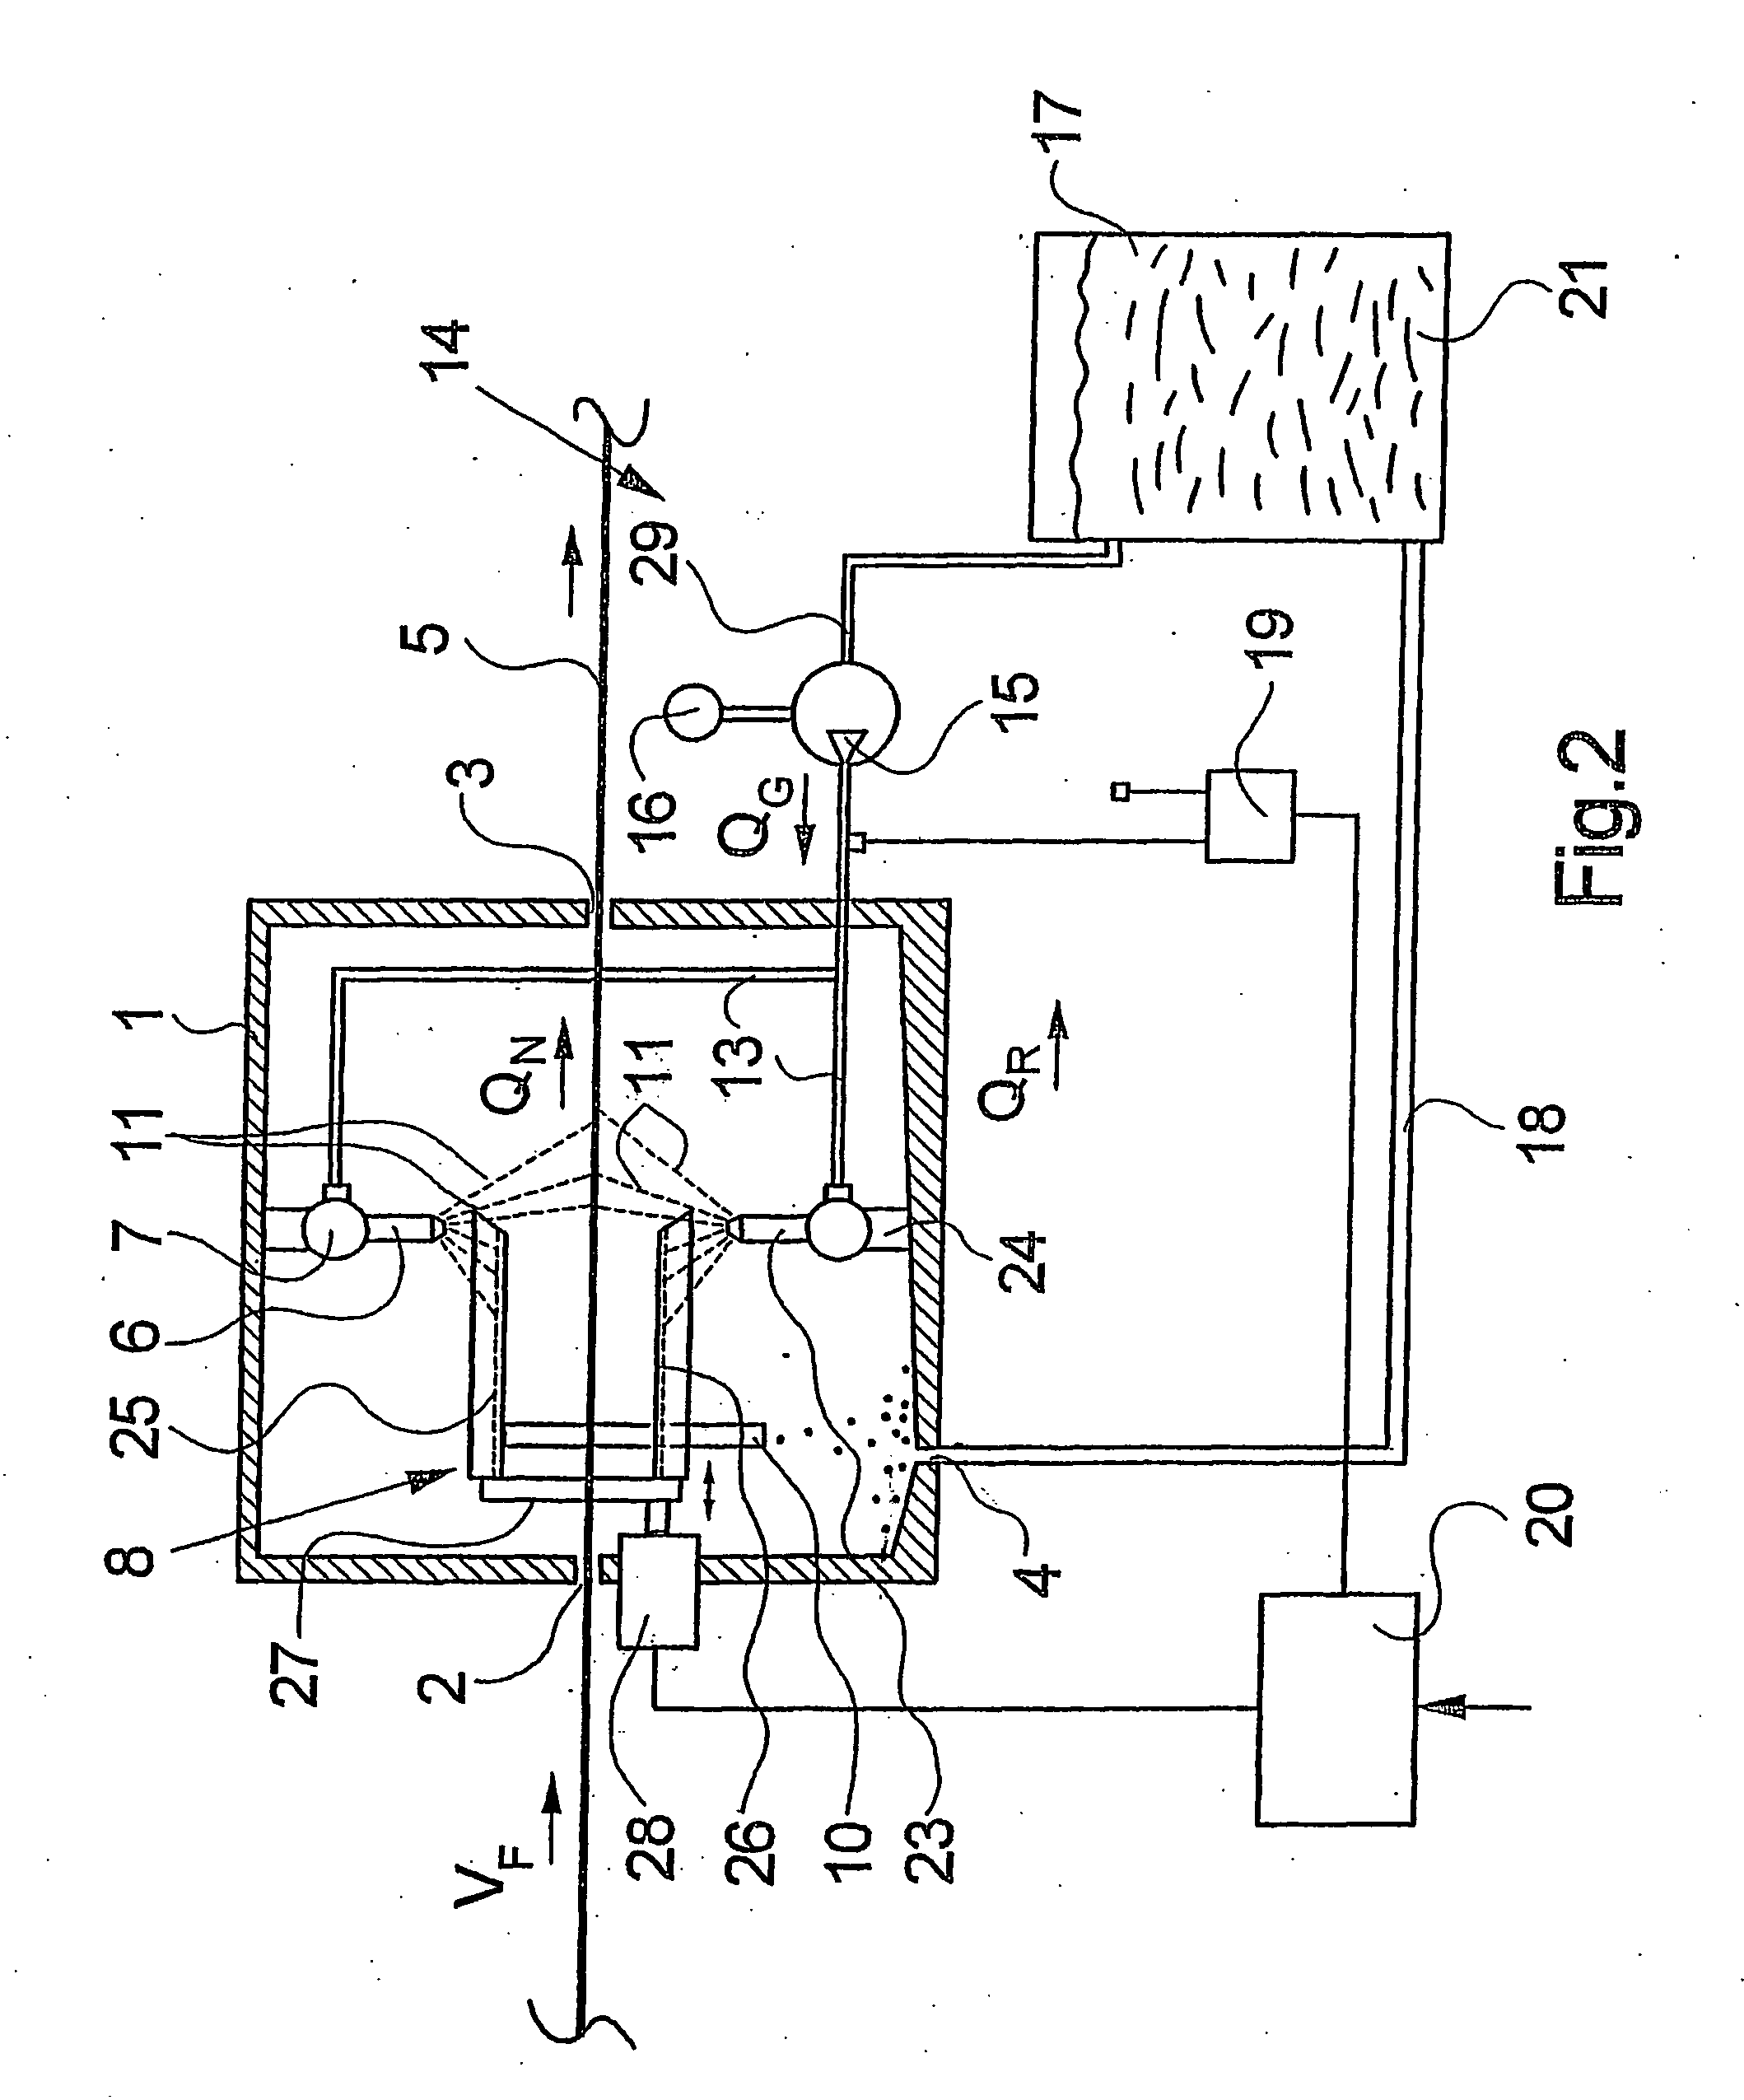 Apparatus for wetting a running filament strand